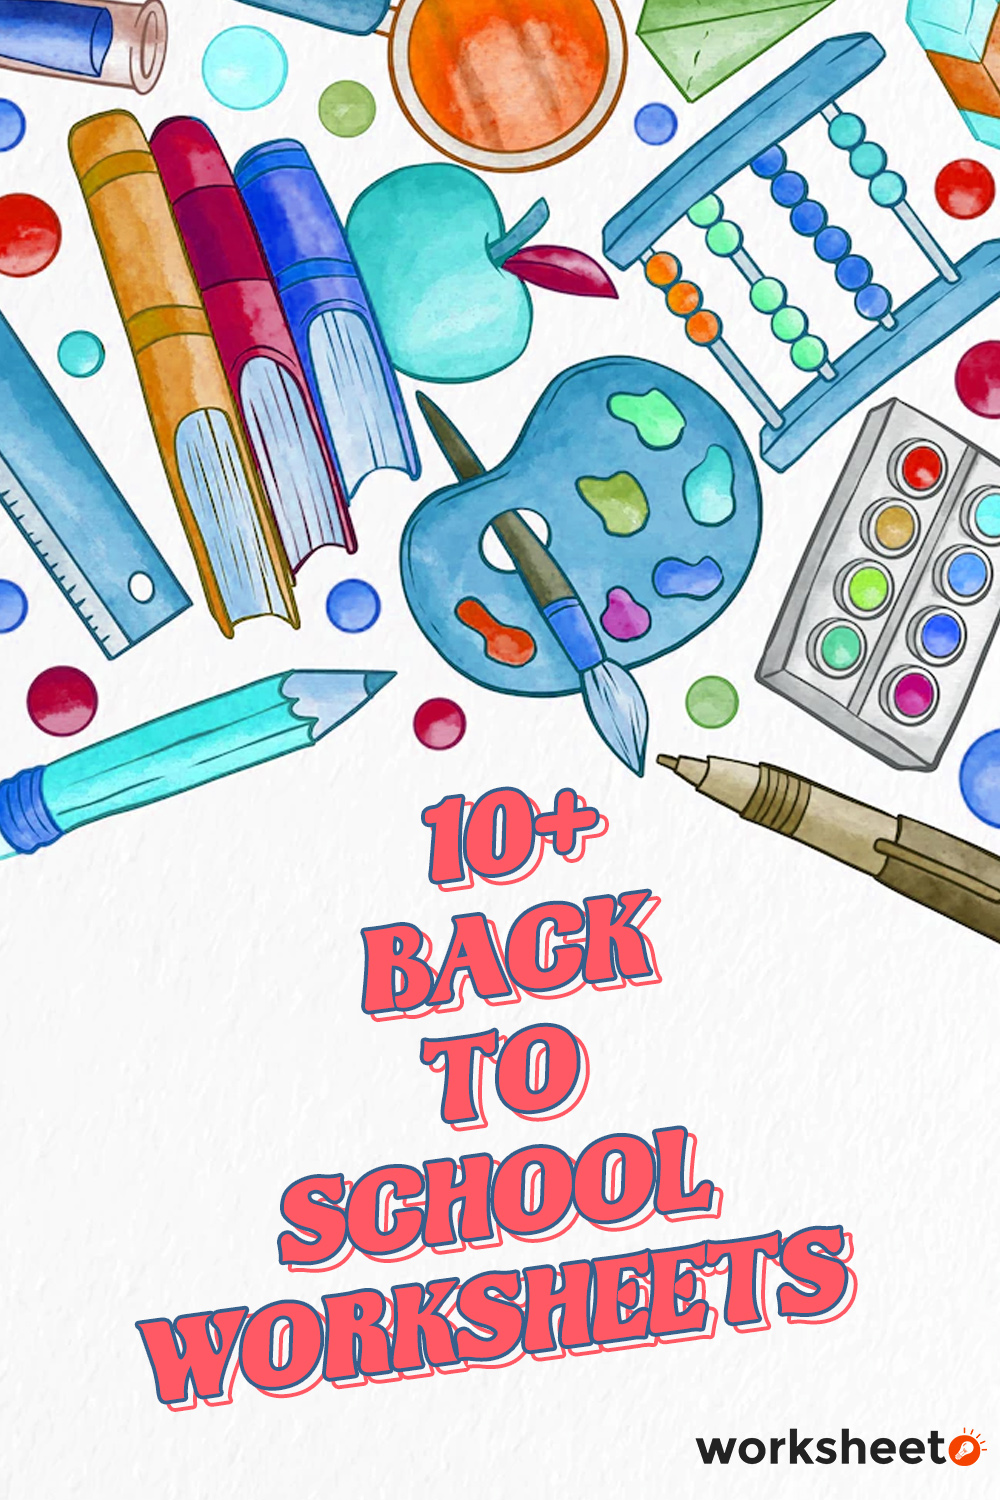 15 Images of Back To School Worksheets